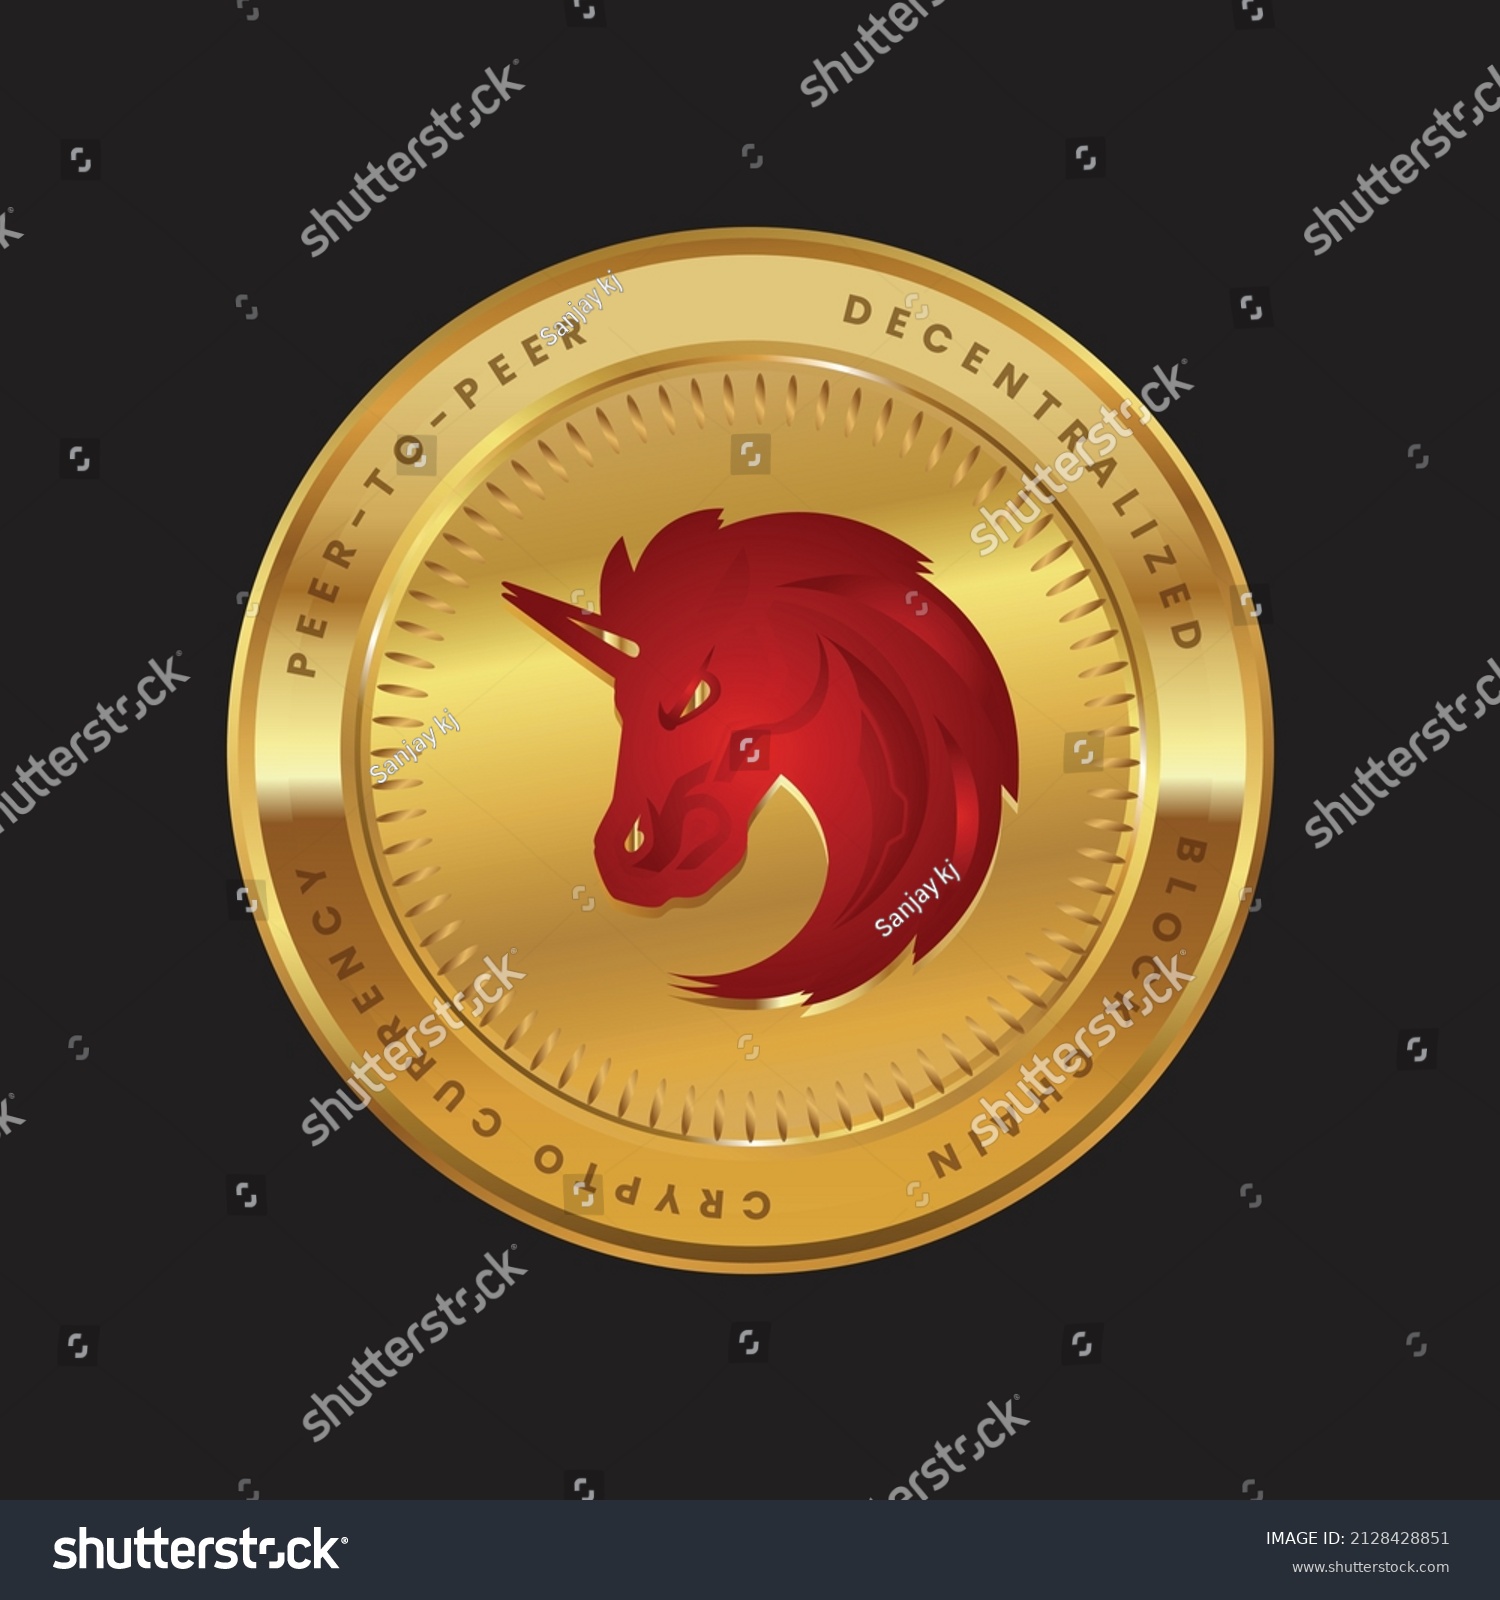 SVG of 1inch Network cryptocurrency 1inch token logo on gold coin in red color theme. svg